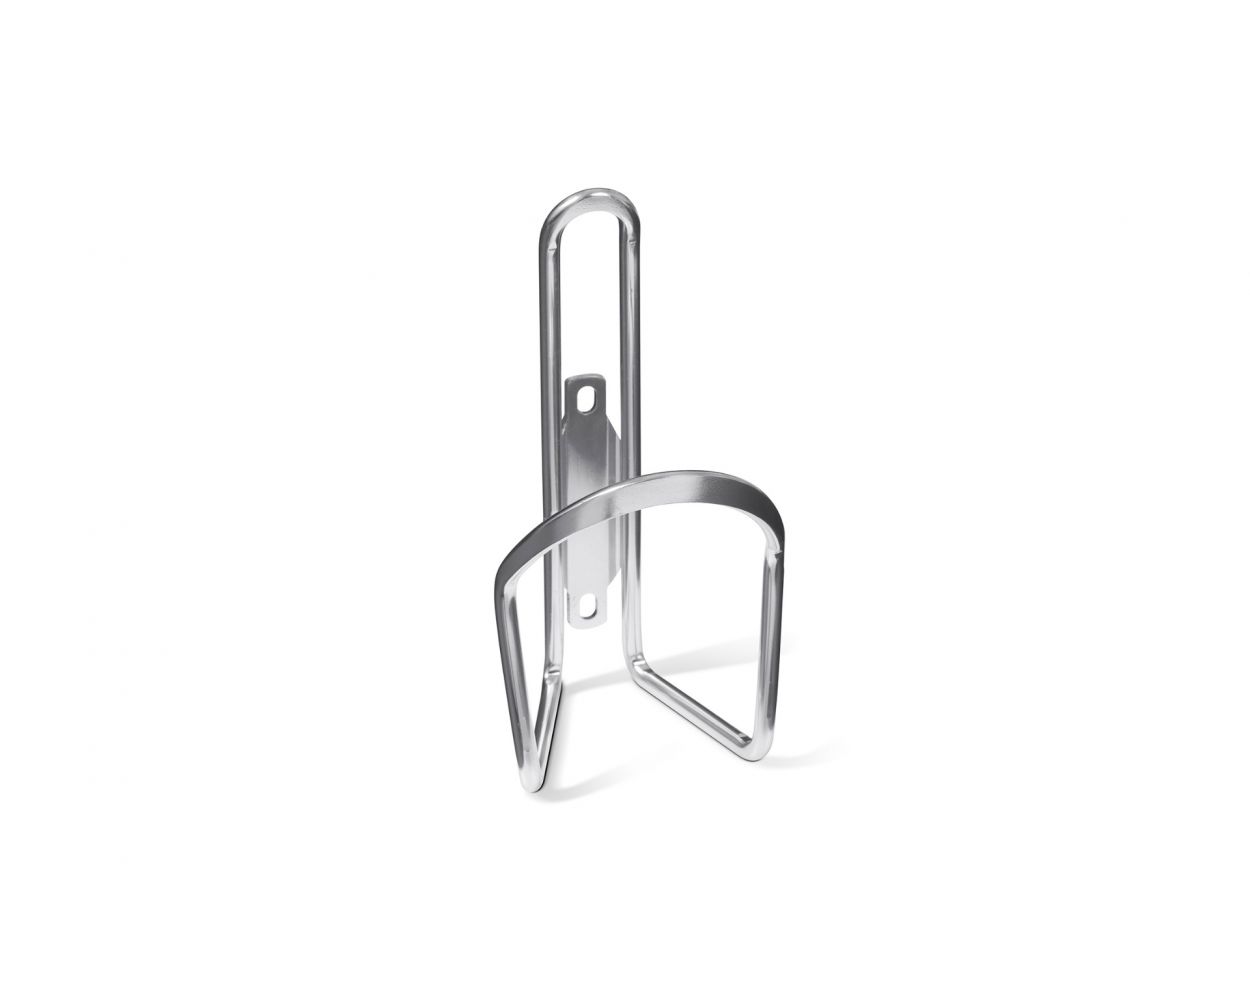 Water Bottle Cage